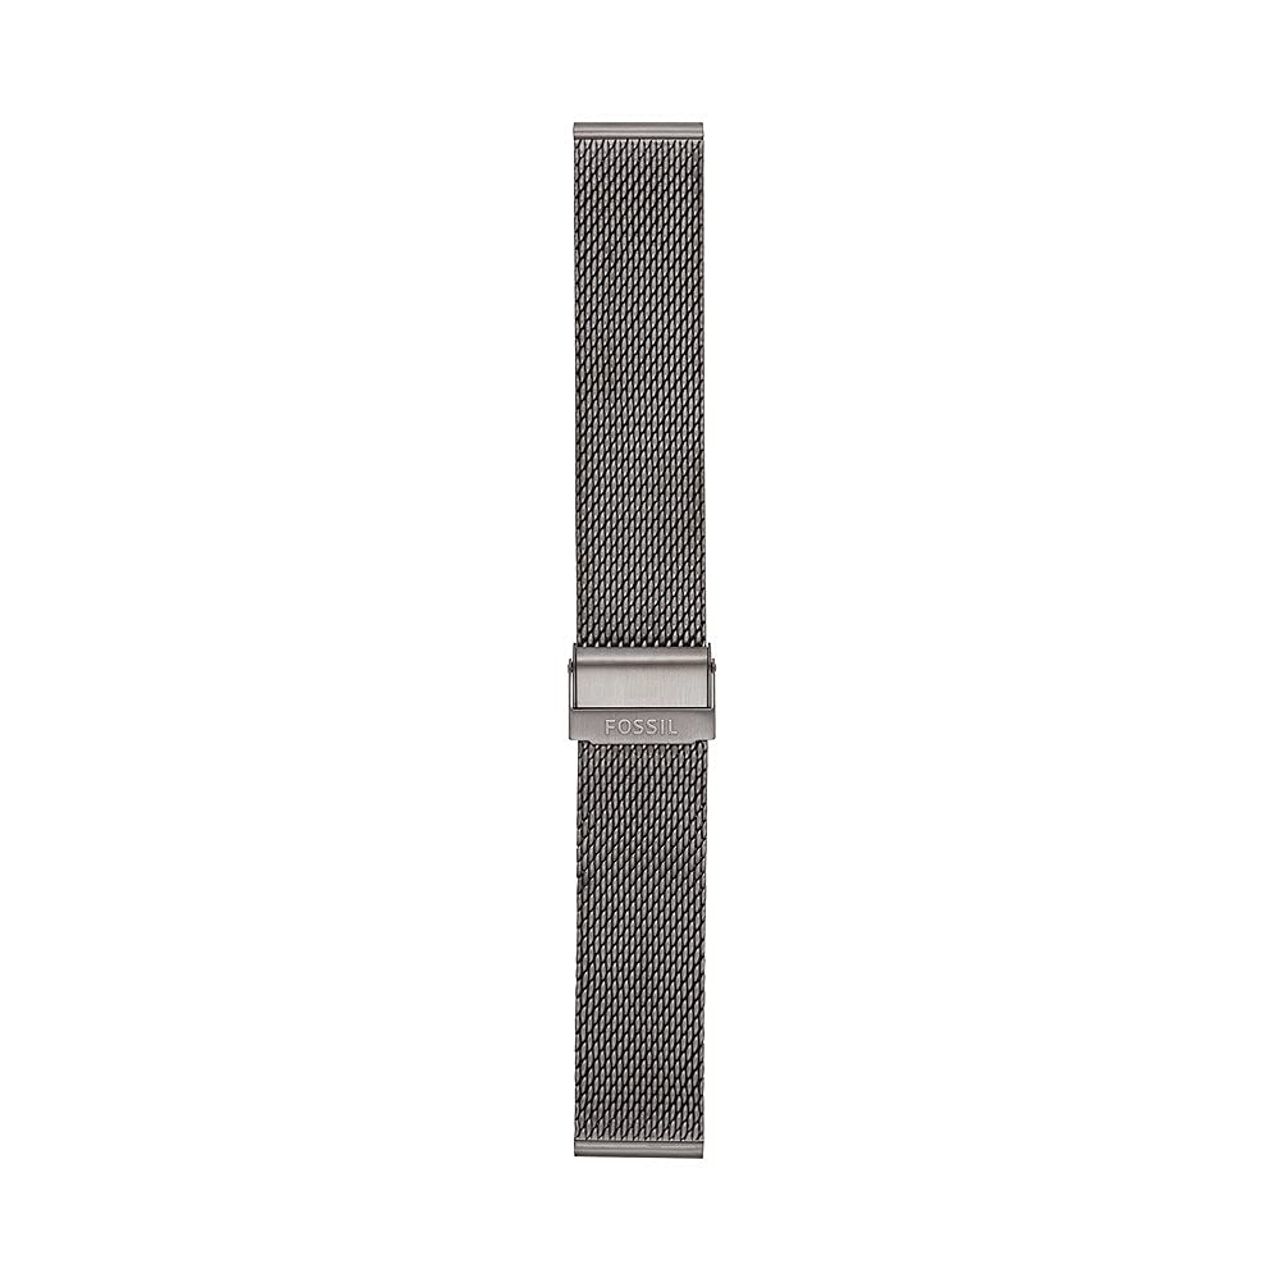 Fossil Strap for Men 22 mm lug width - Compare prices